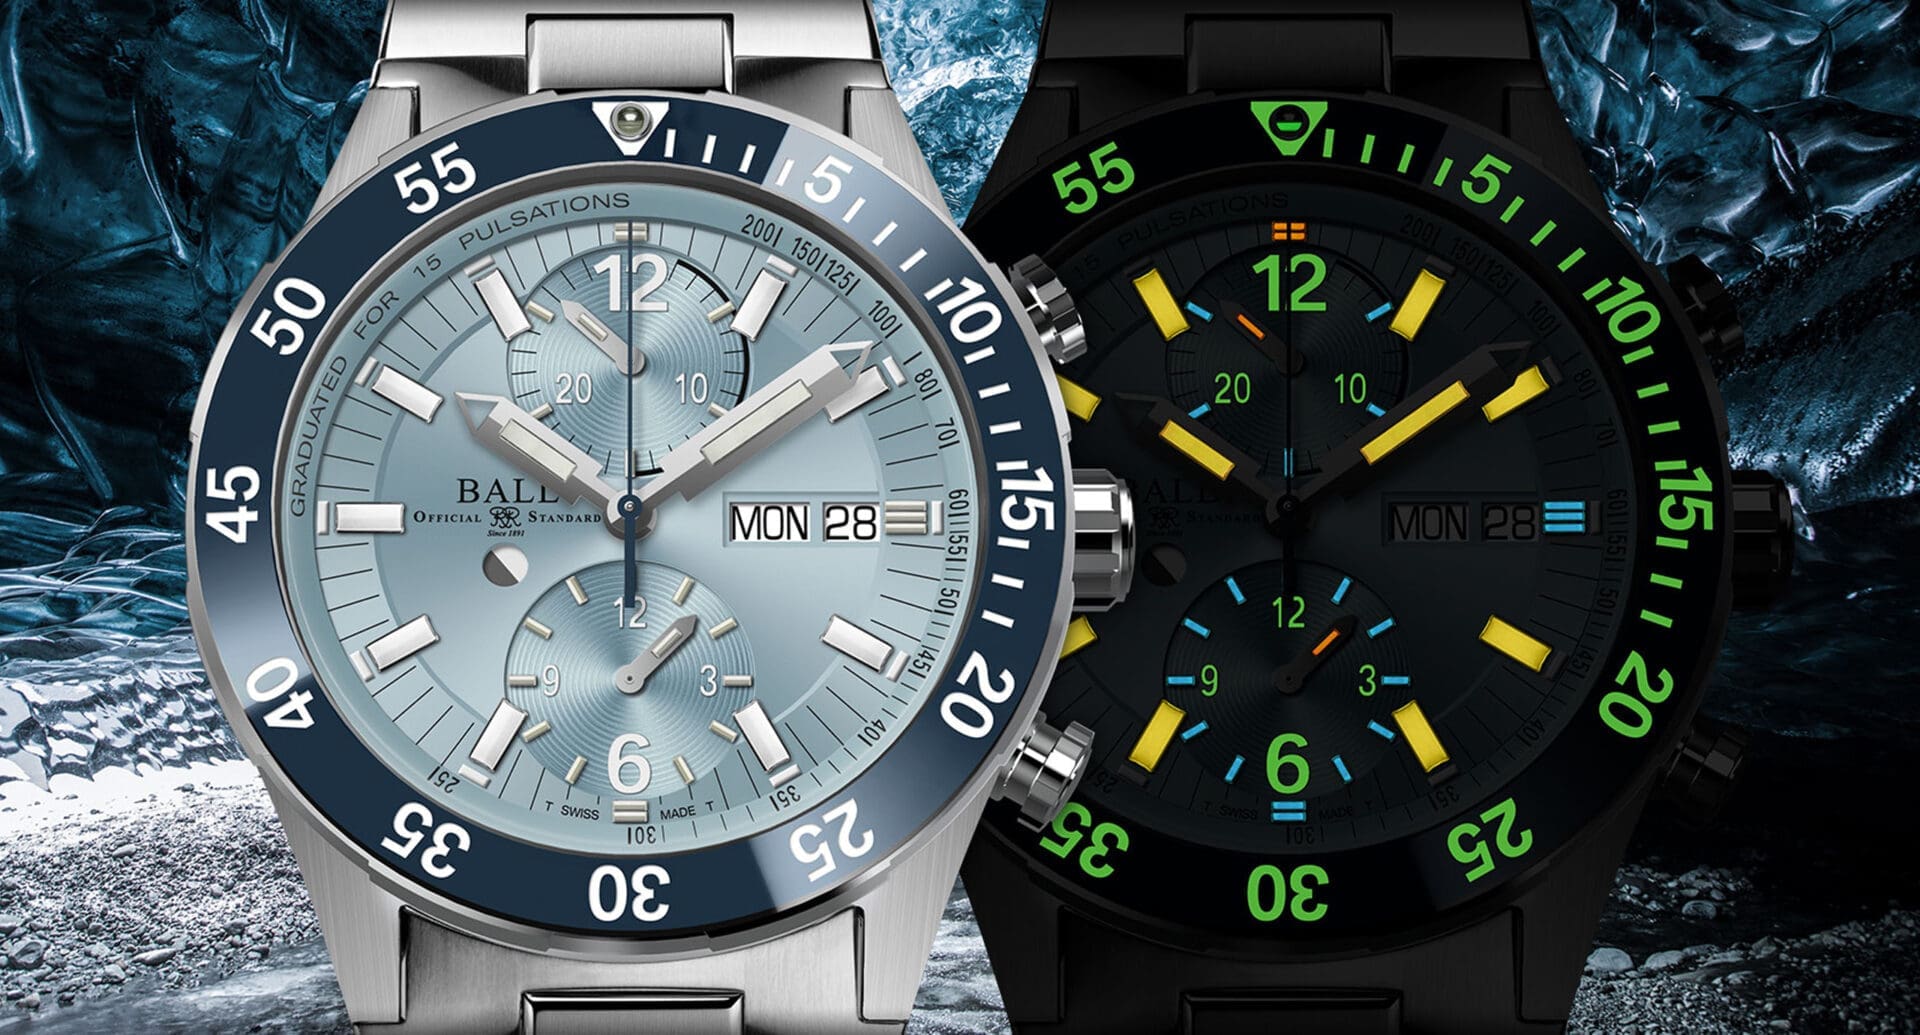 INTRODUCING: The Ball Roadmaster Rescue Chronograph in Ice Blue